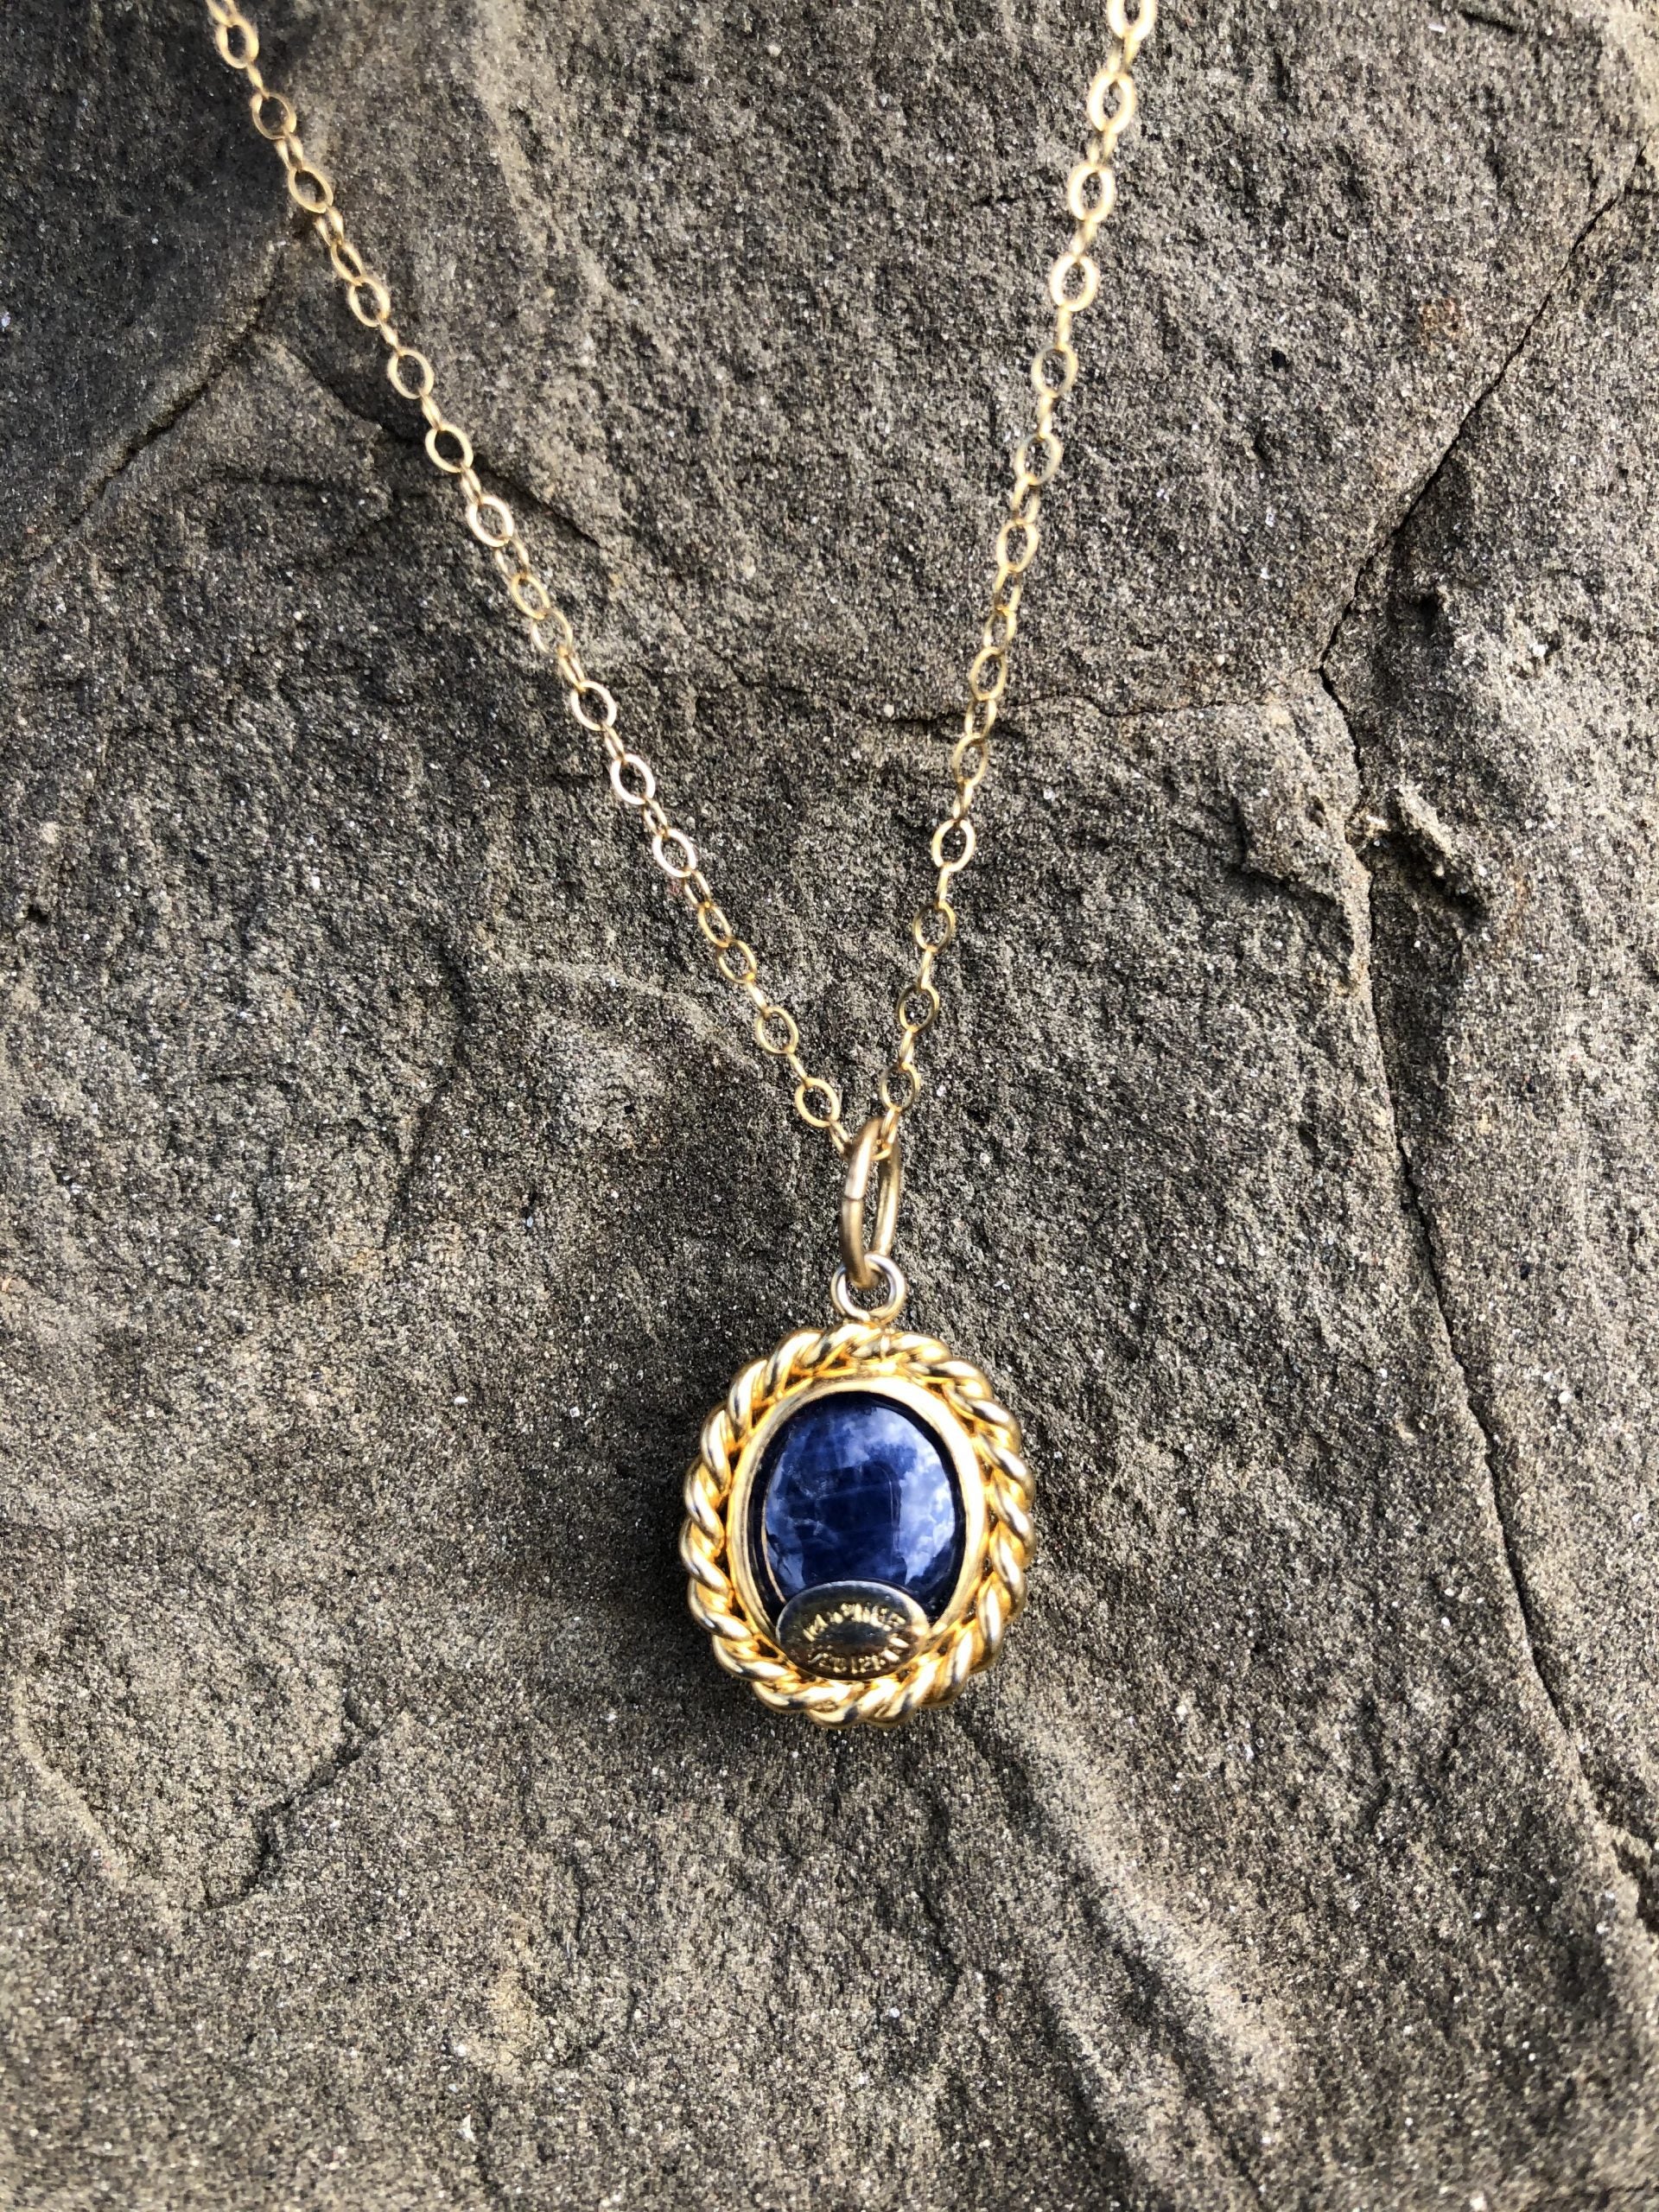 Necklace with a rich blue sapphire, hand polished to a 12x9mm cabochon and set in 14 carat gold filled setting with an 18 inch, 14 carat gold filled chain, back